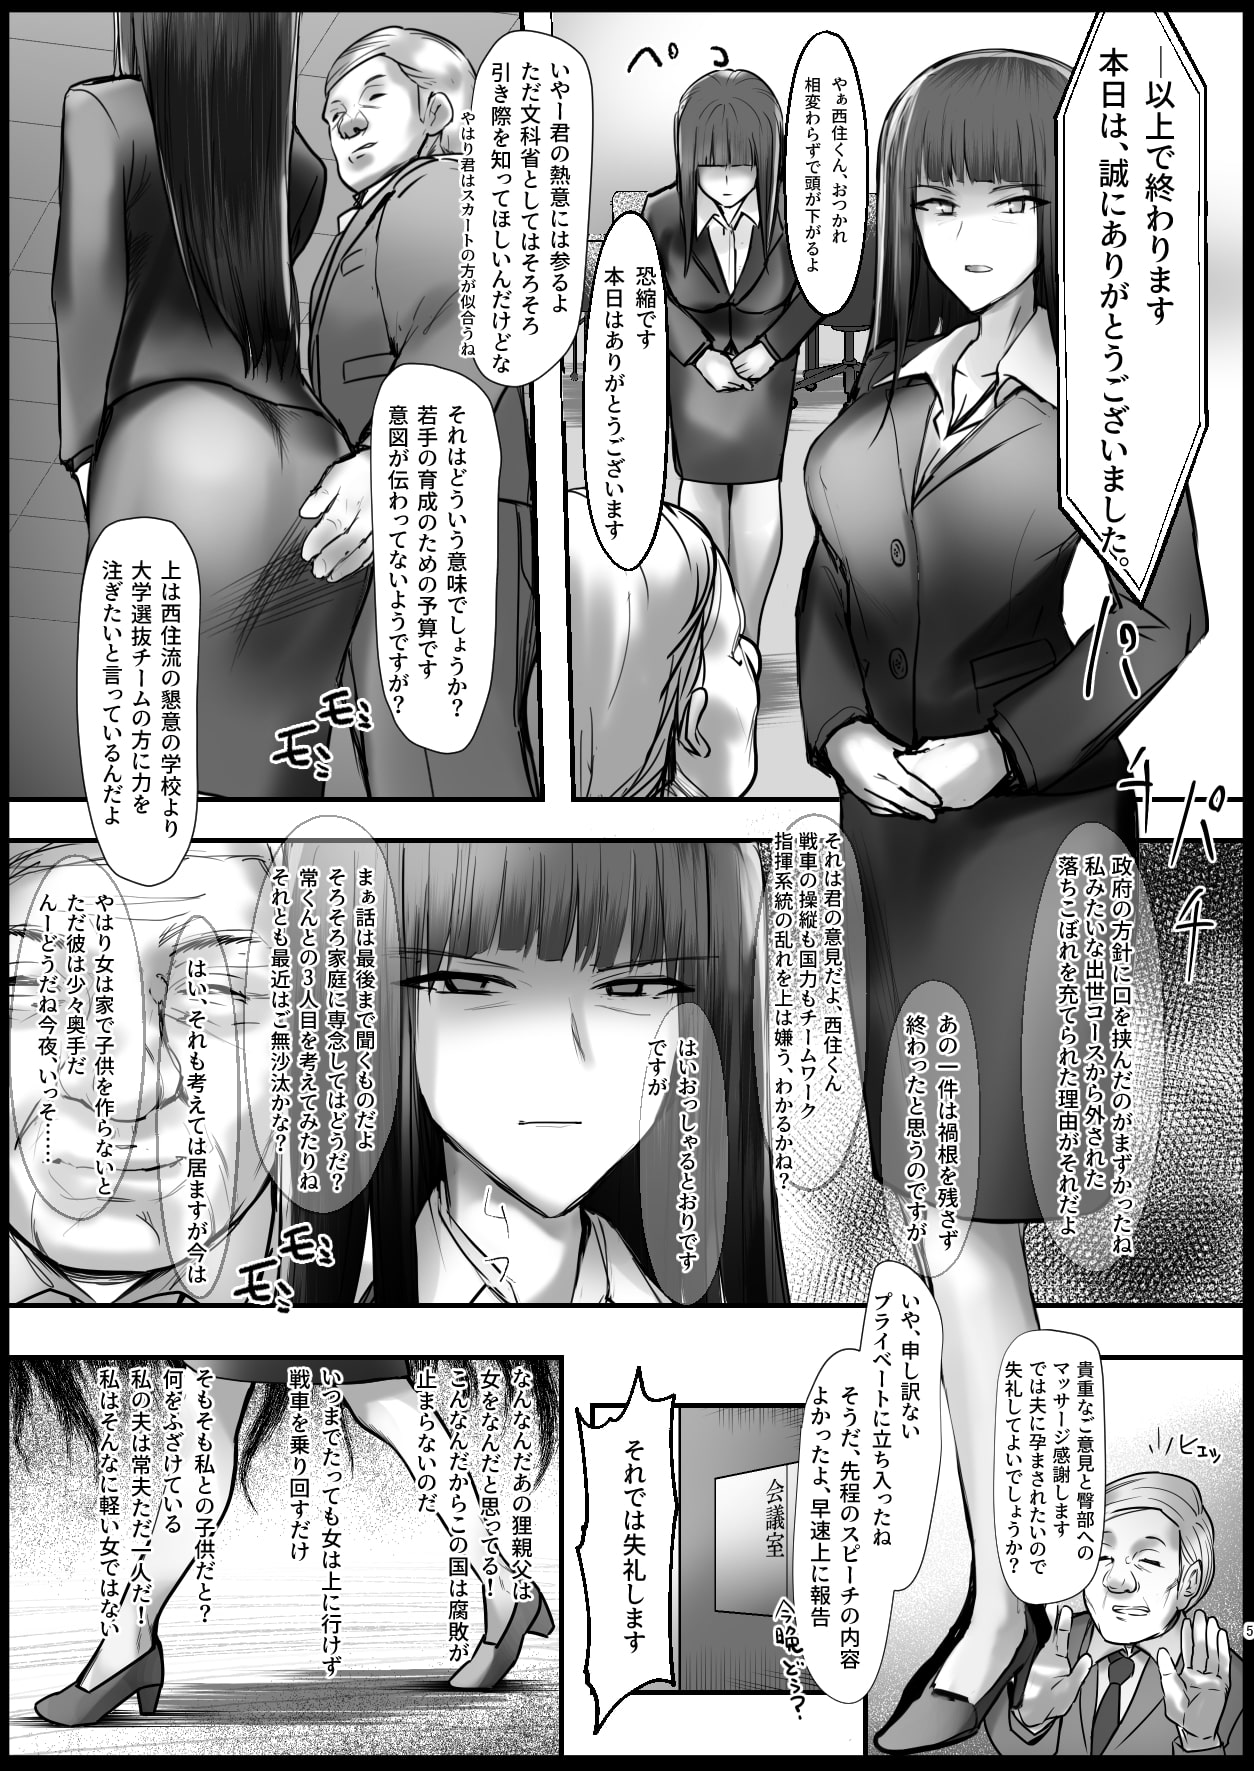 How To Destroy A Strong Tank NTR 1: Case of Sh*ho, Head of the Nishizumi House